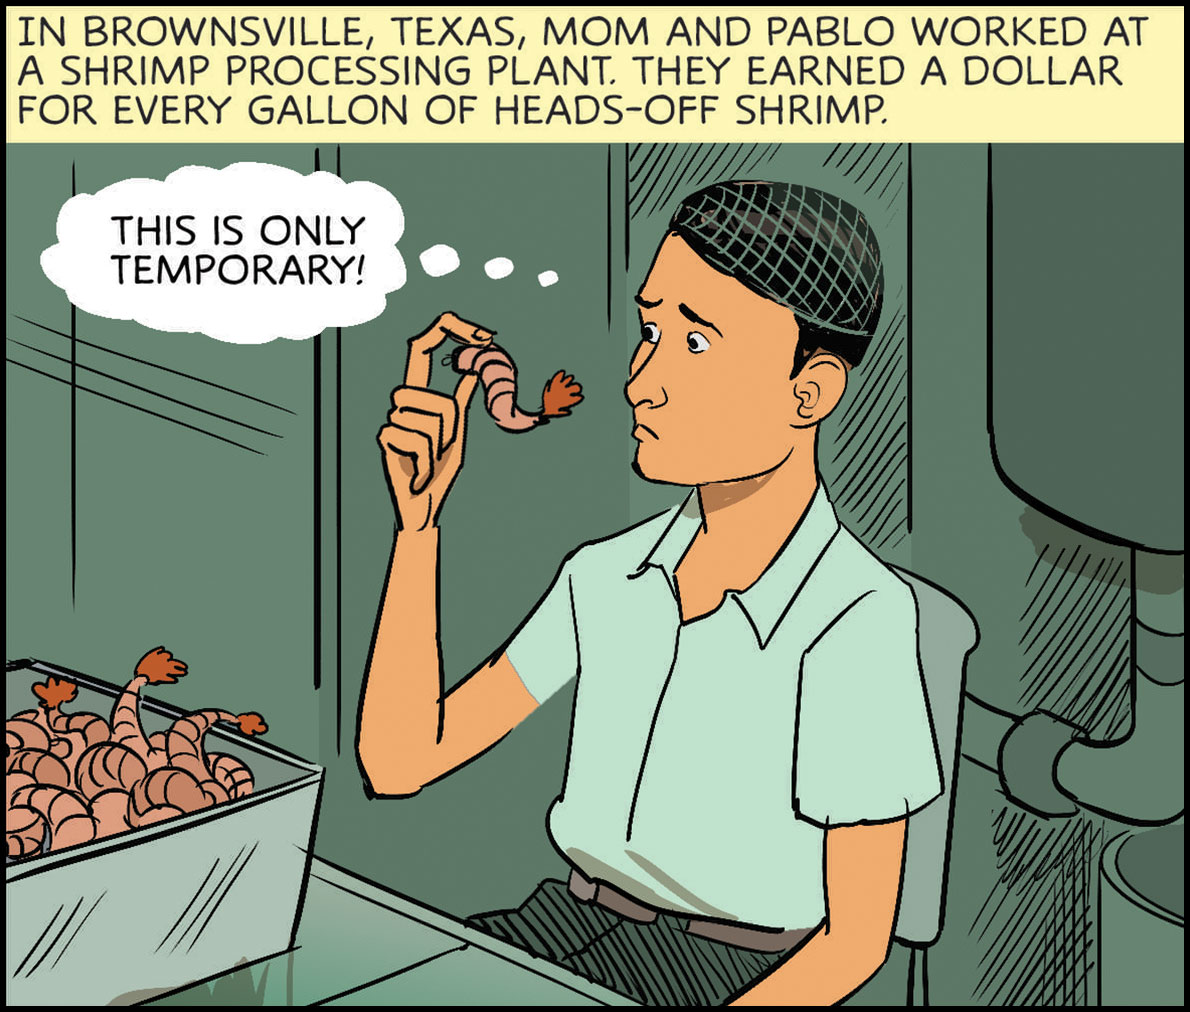 In Brownsville, Texas, mom and Pablo worked at a shrimp processing plant. They earned a dollar for every gallon of heads-off shrimp. Pablo thought bubble: “This is only temporary!” 